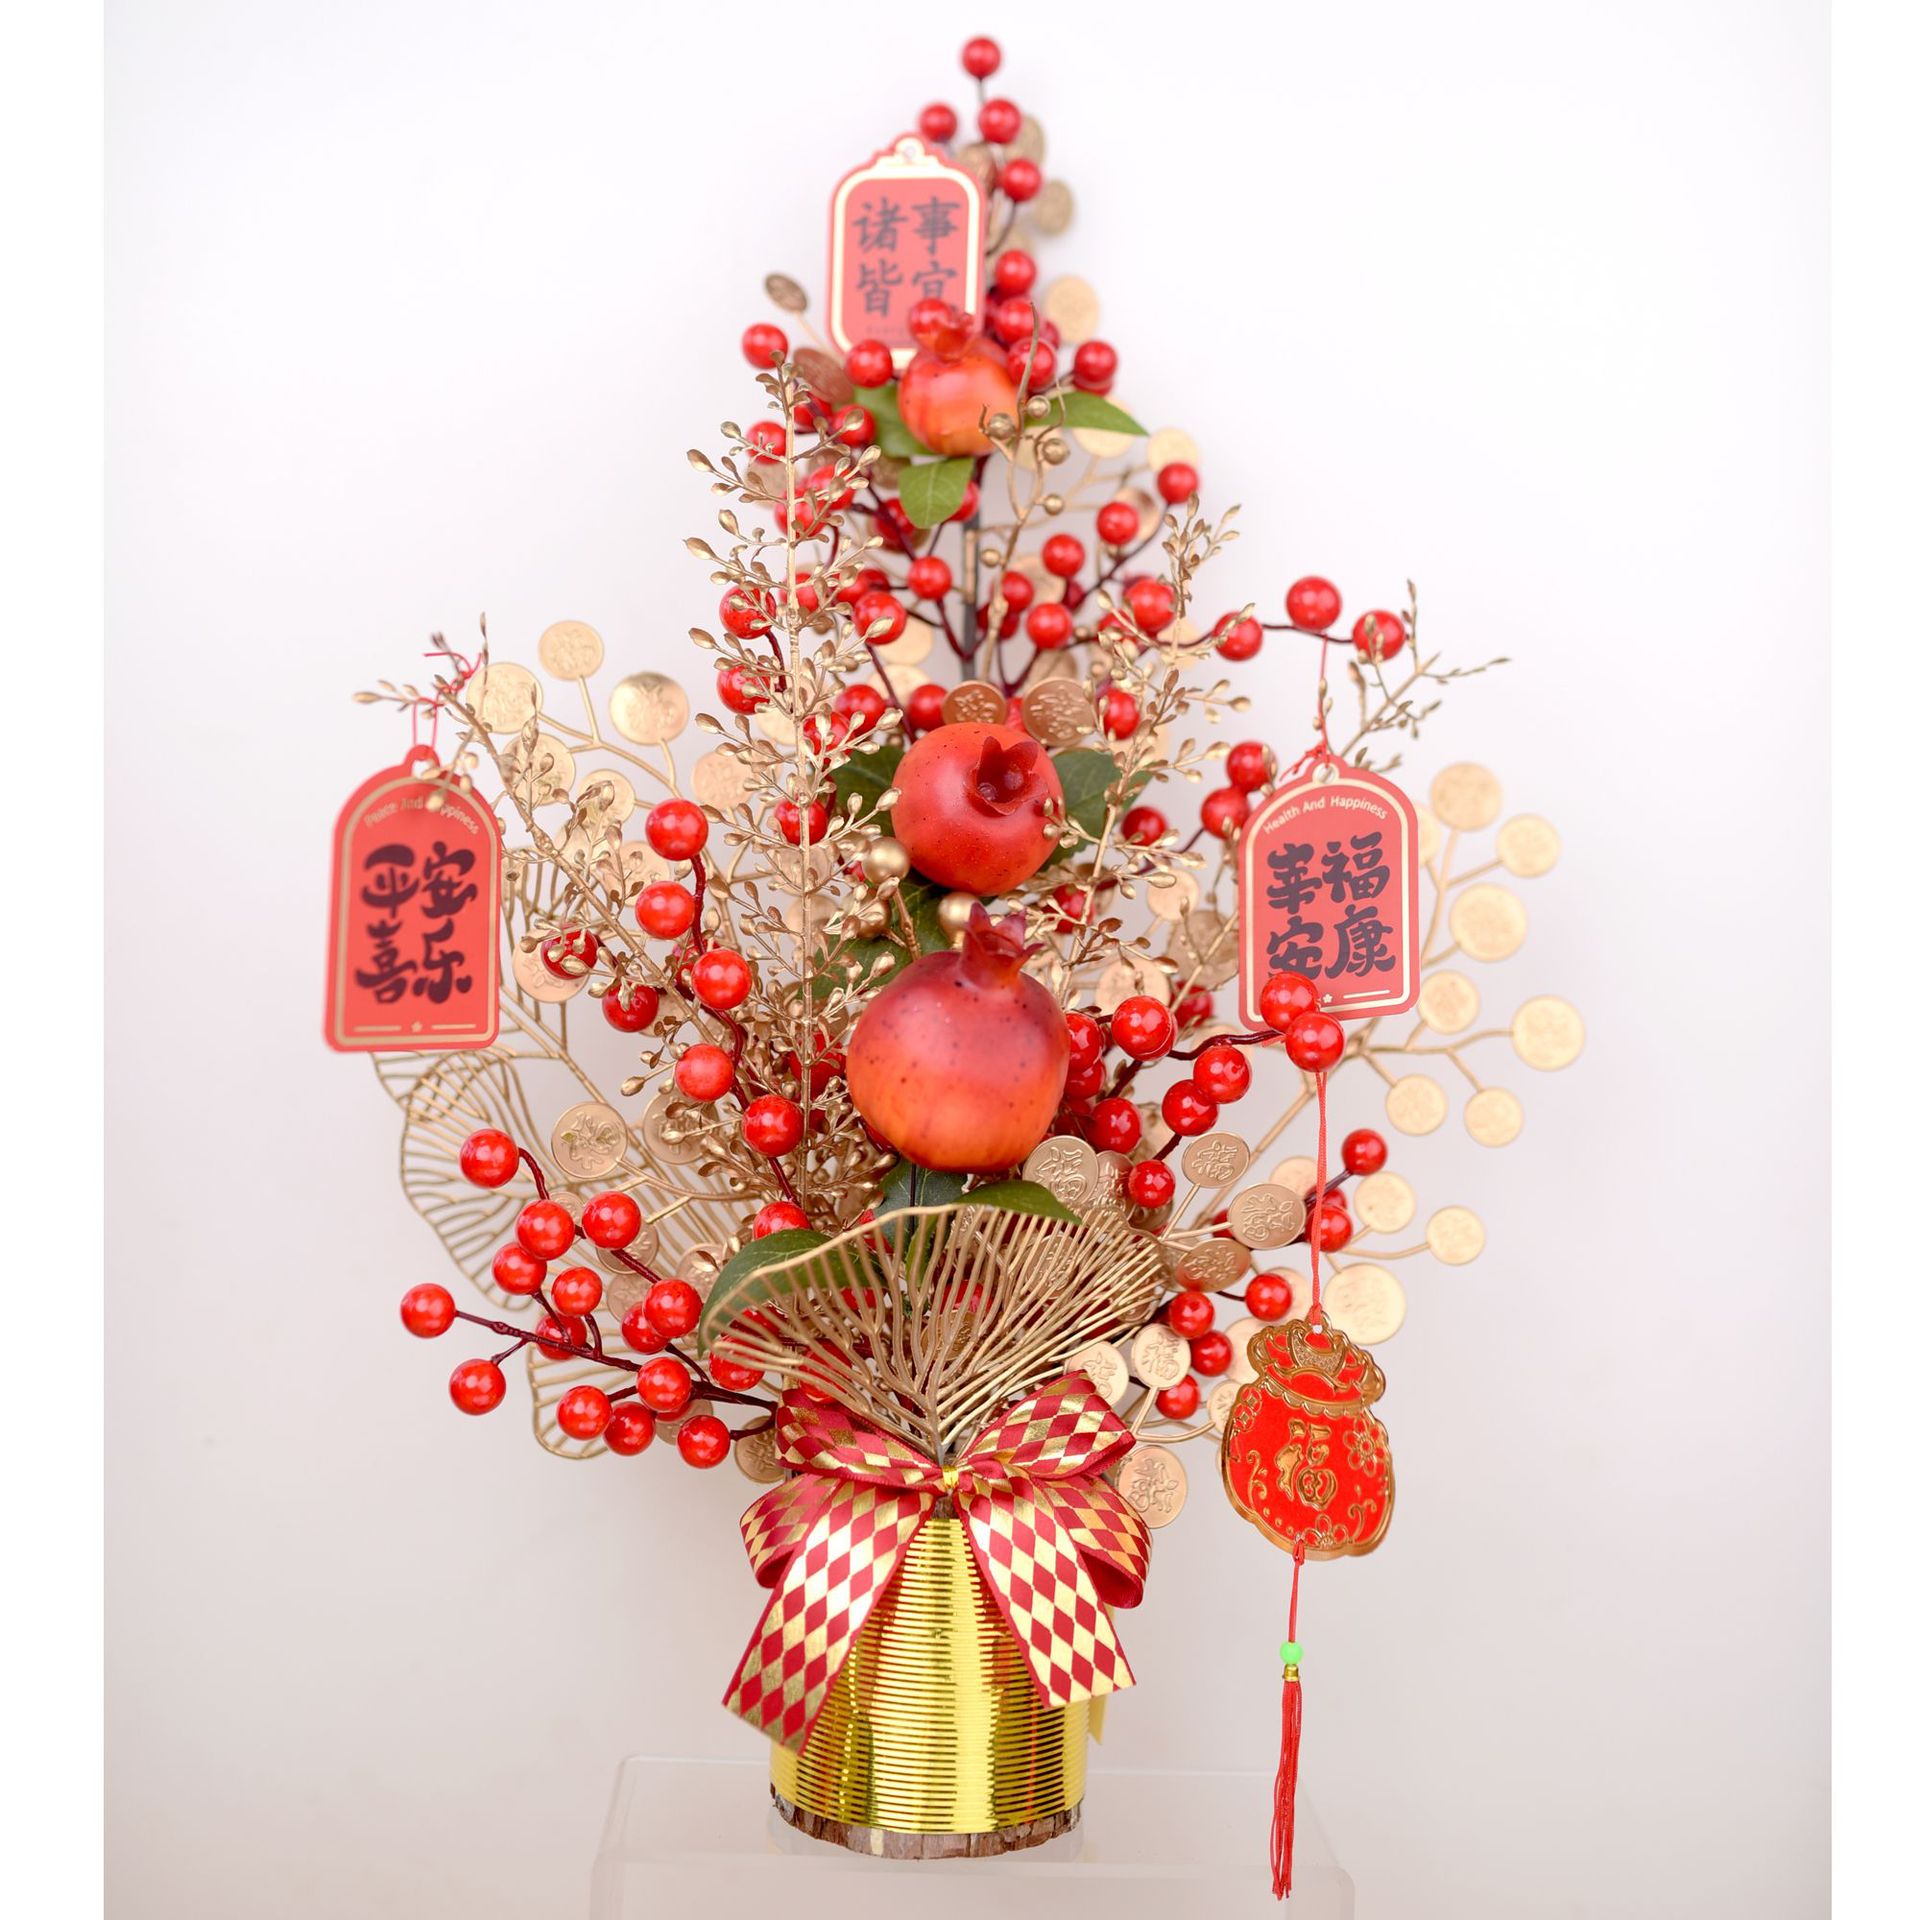 2023 New Year Decorations Chinese New Year New Year's Day Lunar New Year Flower Decoration Decoration Indoor Shopping Window Layout Supplies